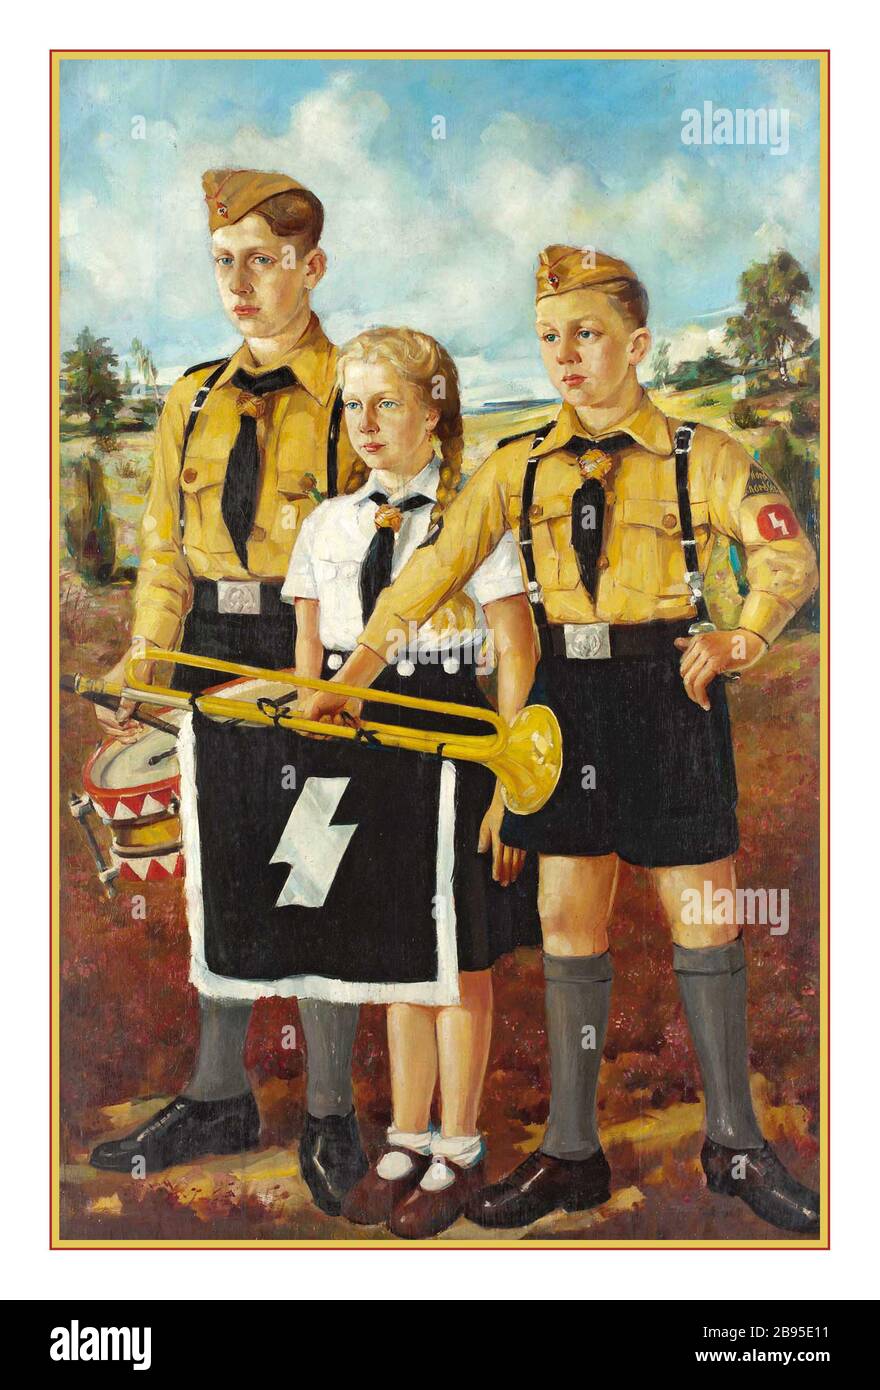 Vintage 1930s The Hitler Youth German: Hitlerjugend,  was the youth organisation of the Nazi Party in Germany. Its origins dated back to 1922 and it received the name Hitler-Jugend, Bund deutscher Arbeiterjugend ('Hitler Youth, League of German Worker Youth') in July 1926. From 1933 until 1945, it was the sole official boy's youth organisation in Germany and was partially a paramilitary organisation; it was composed of the Hitler Youth proper for male youths aged 14 to 18, and the German Youngsters in the Hitler Youth Deutsches Jungvolk in der Hitler Jugend Stock Photo